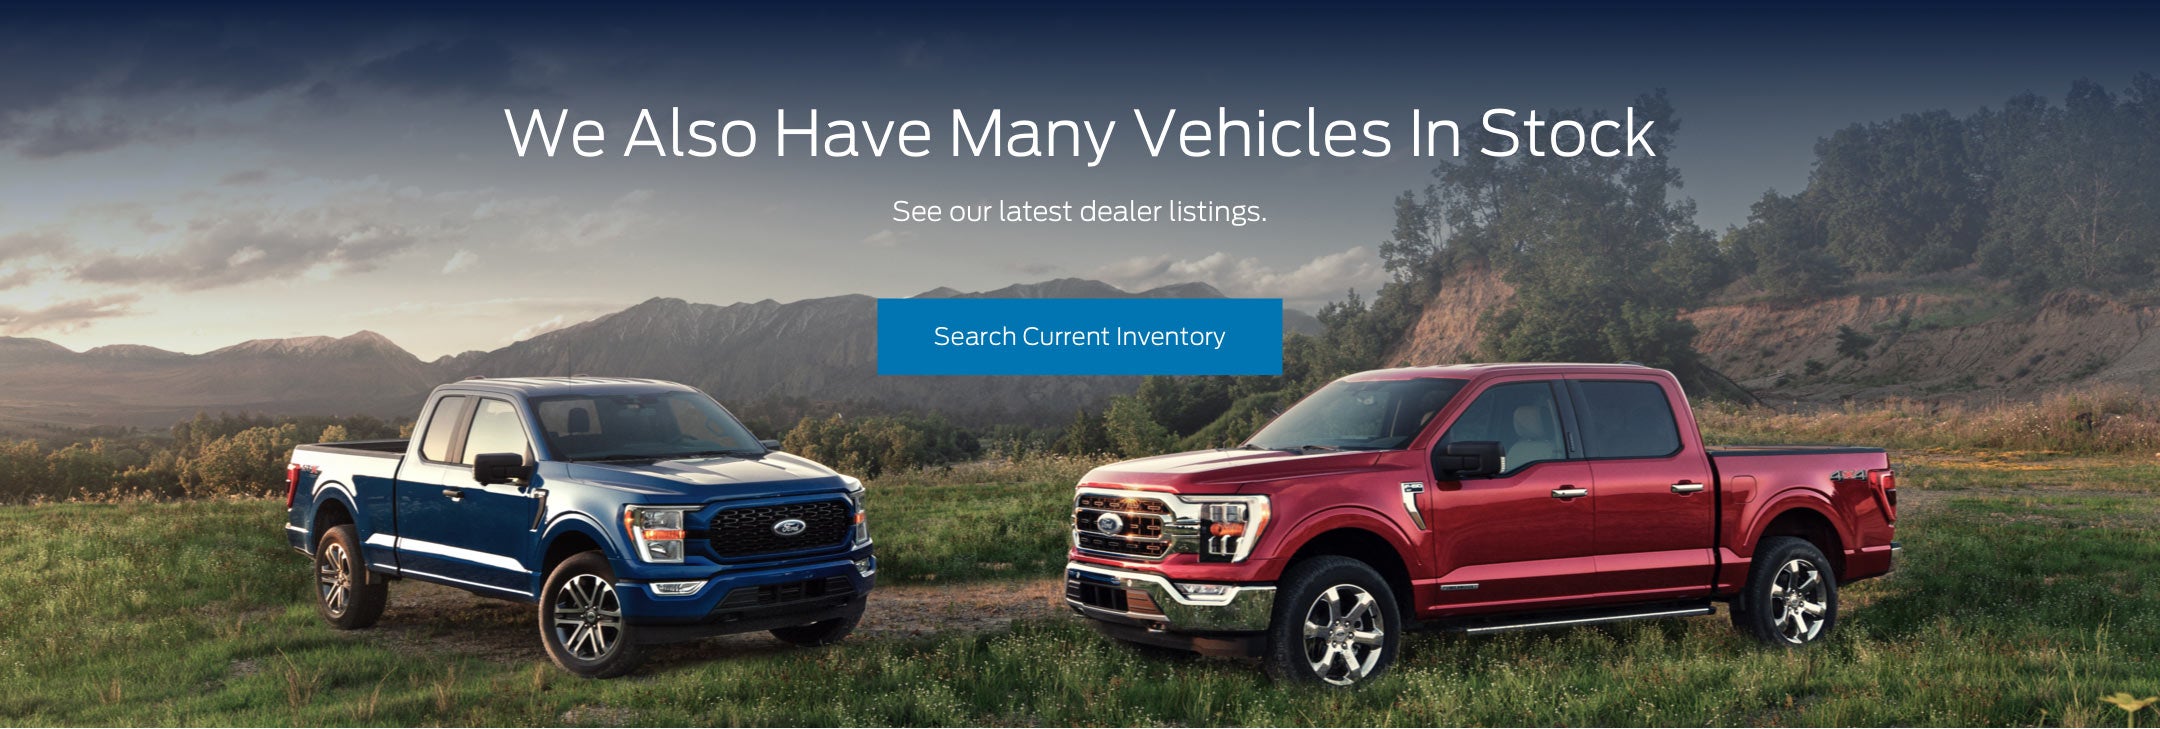 Ford vehicles in stock | Serra Ford Rochester Hills in Rochester Hills MI